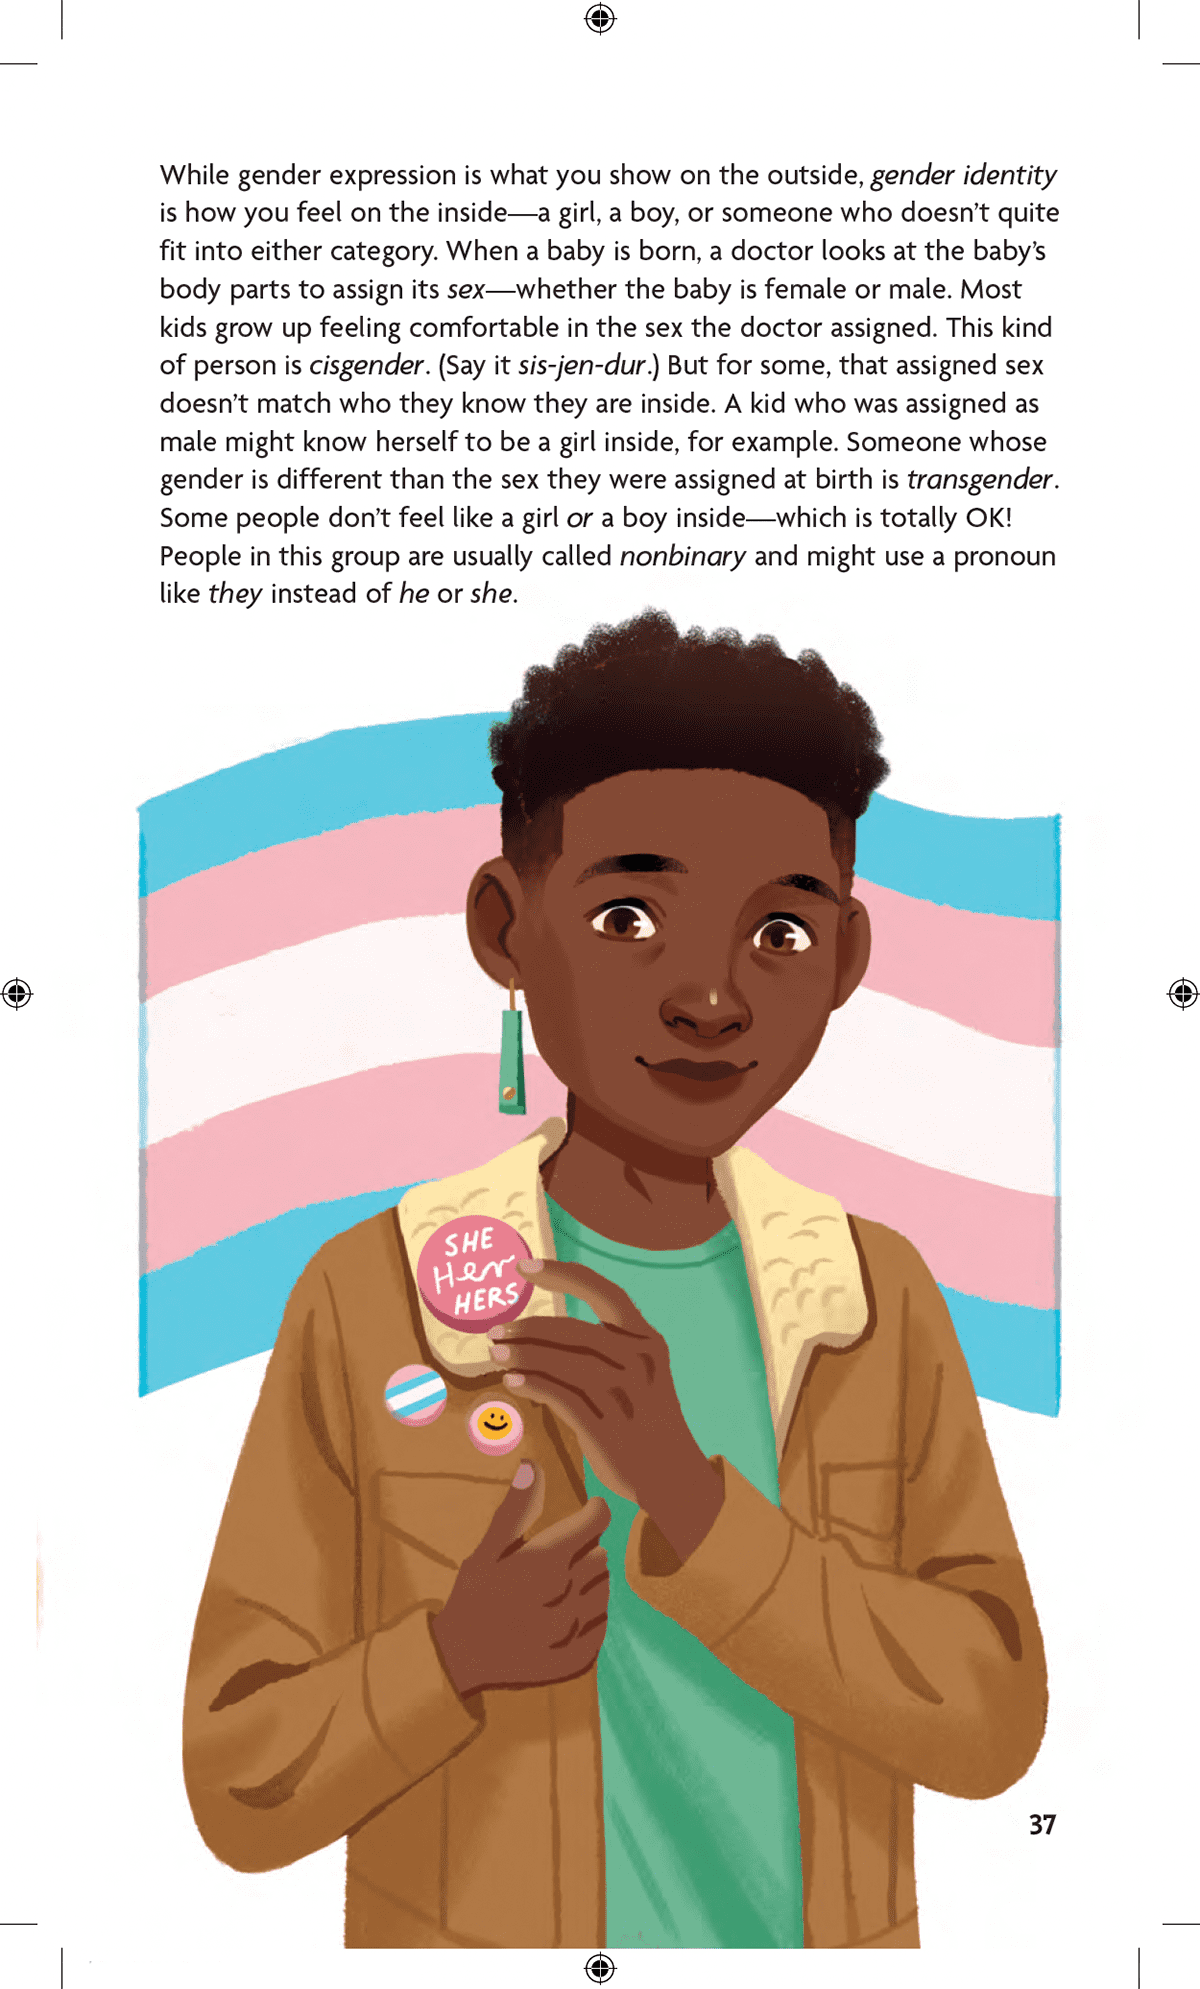 A page from the Smart Girl’s Guide book 